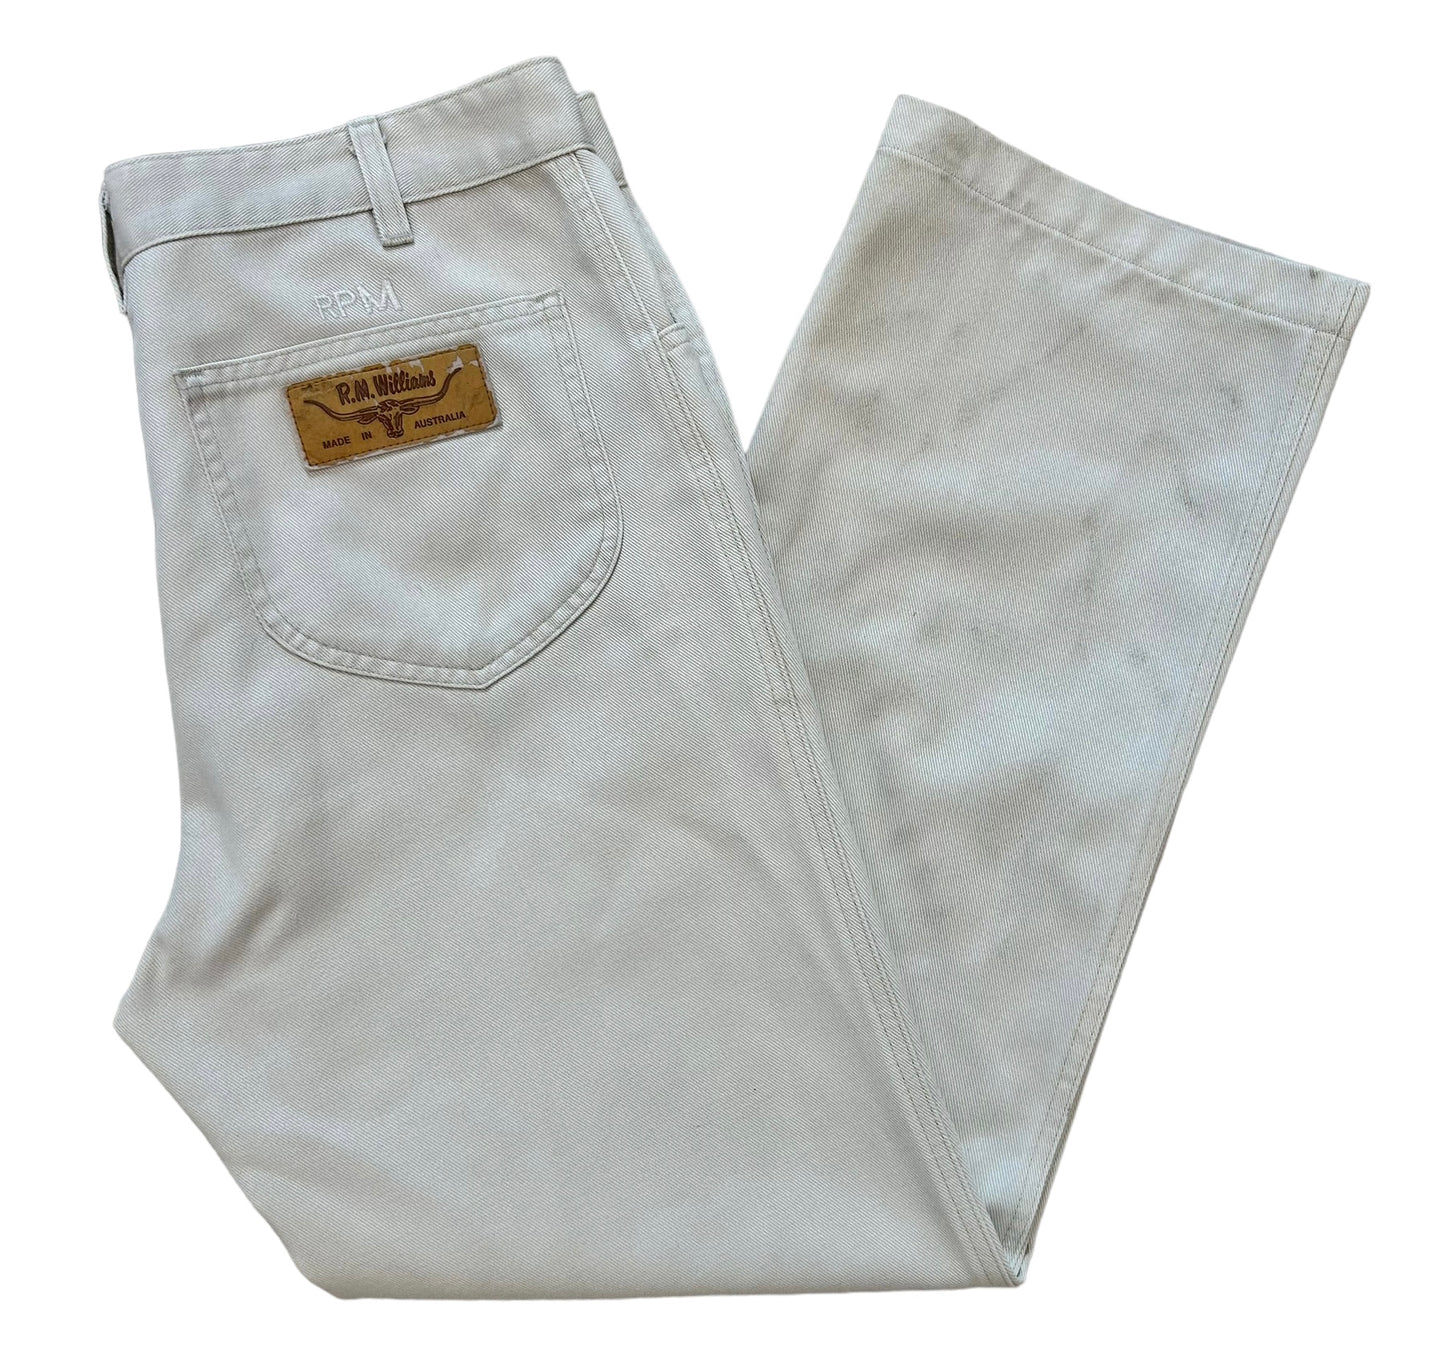 Vintage RM Williams Trousers